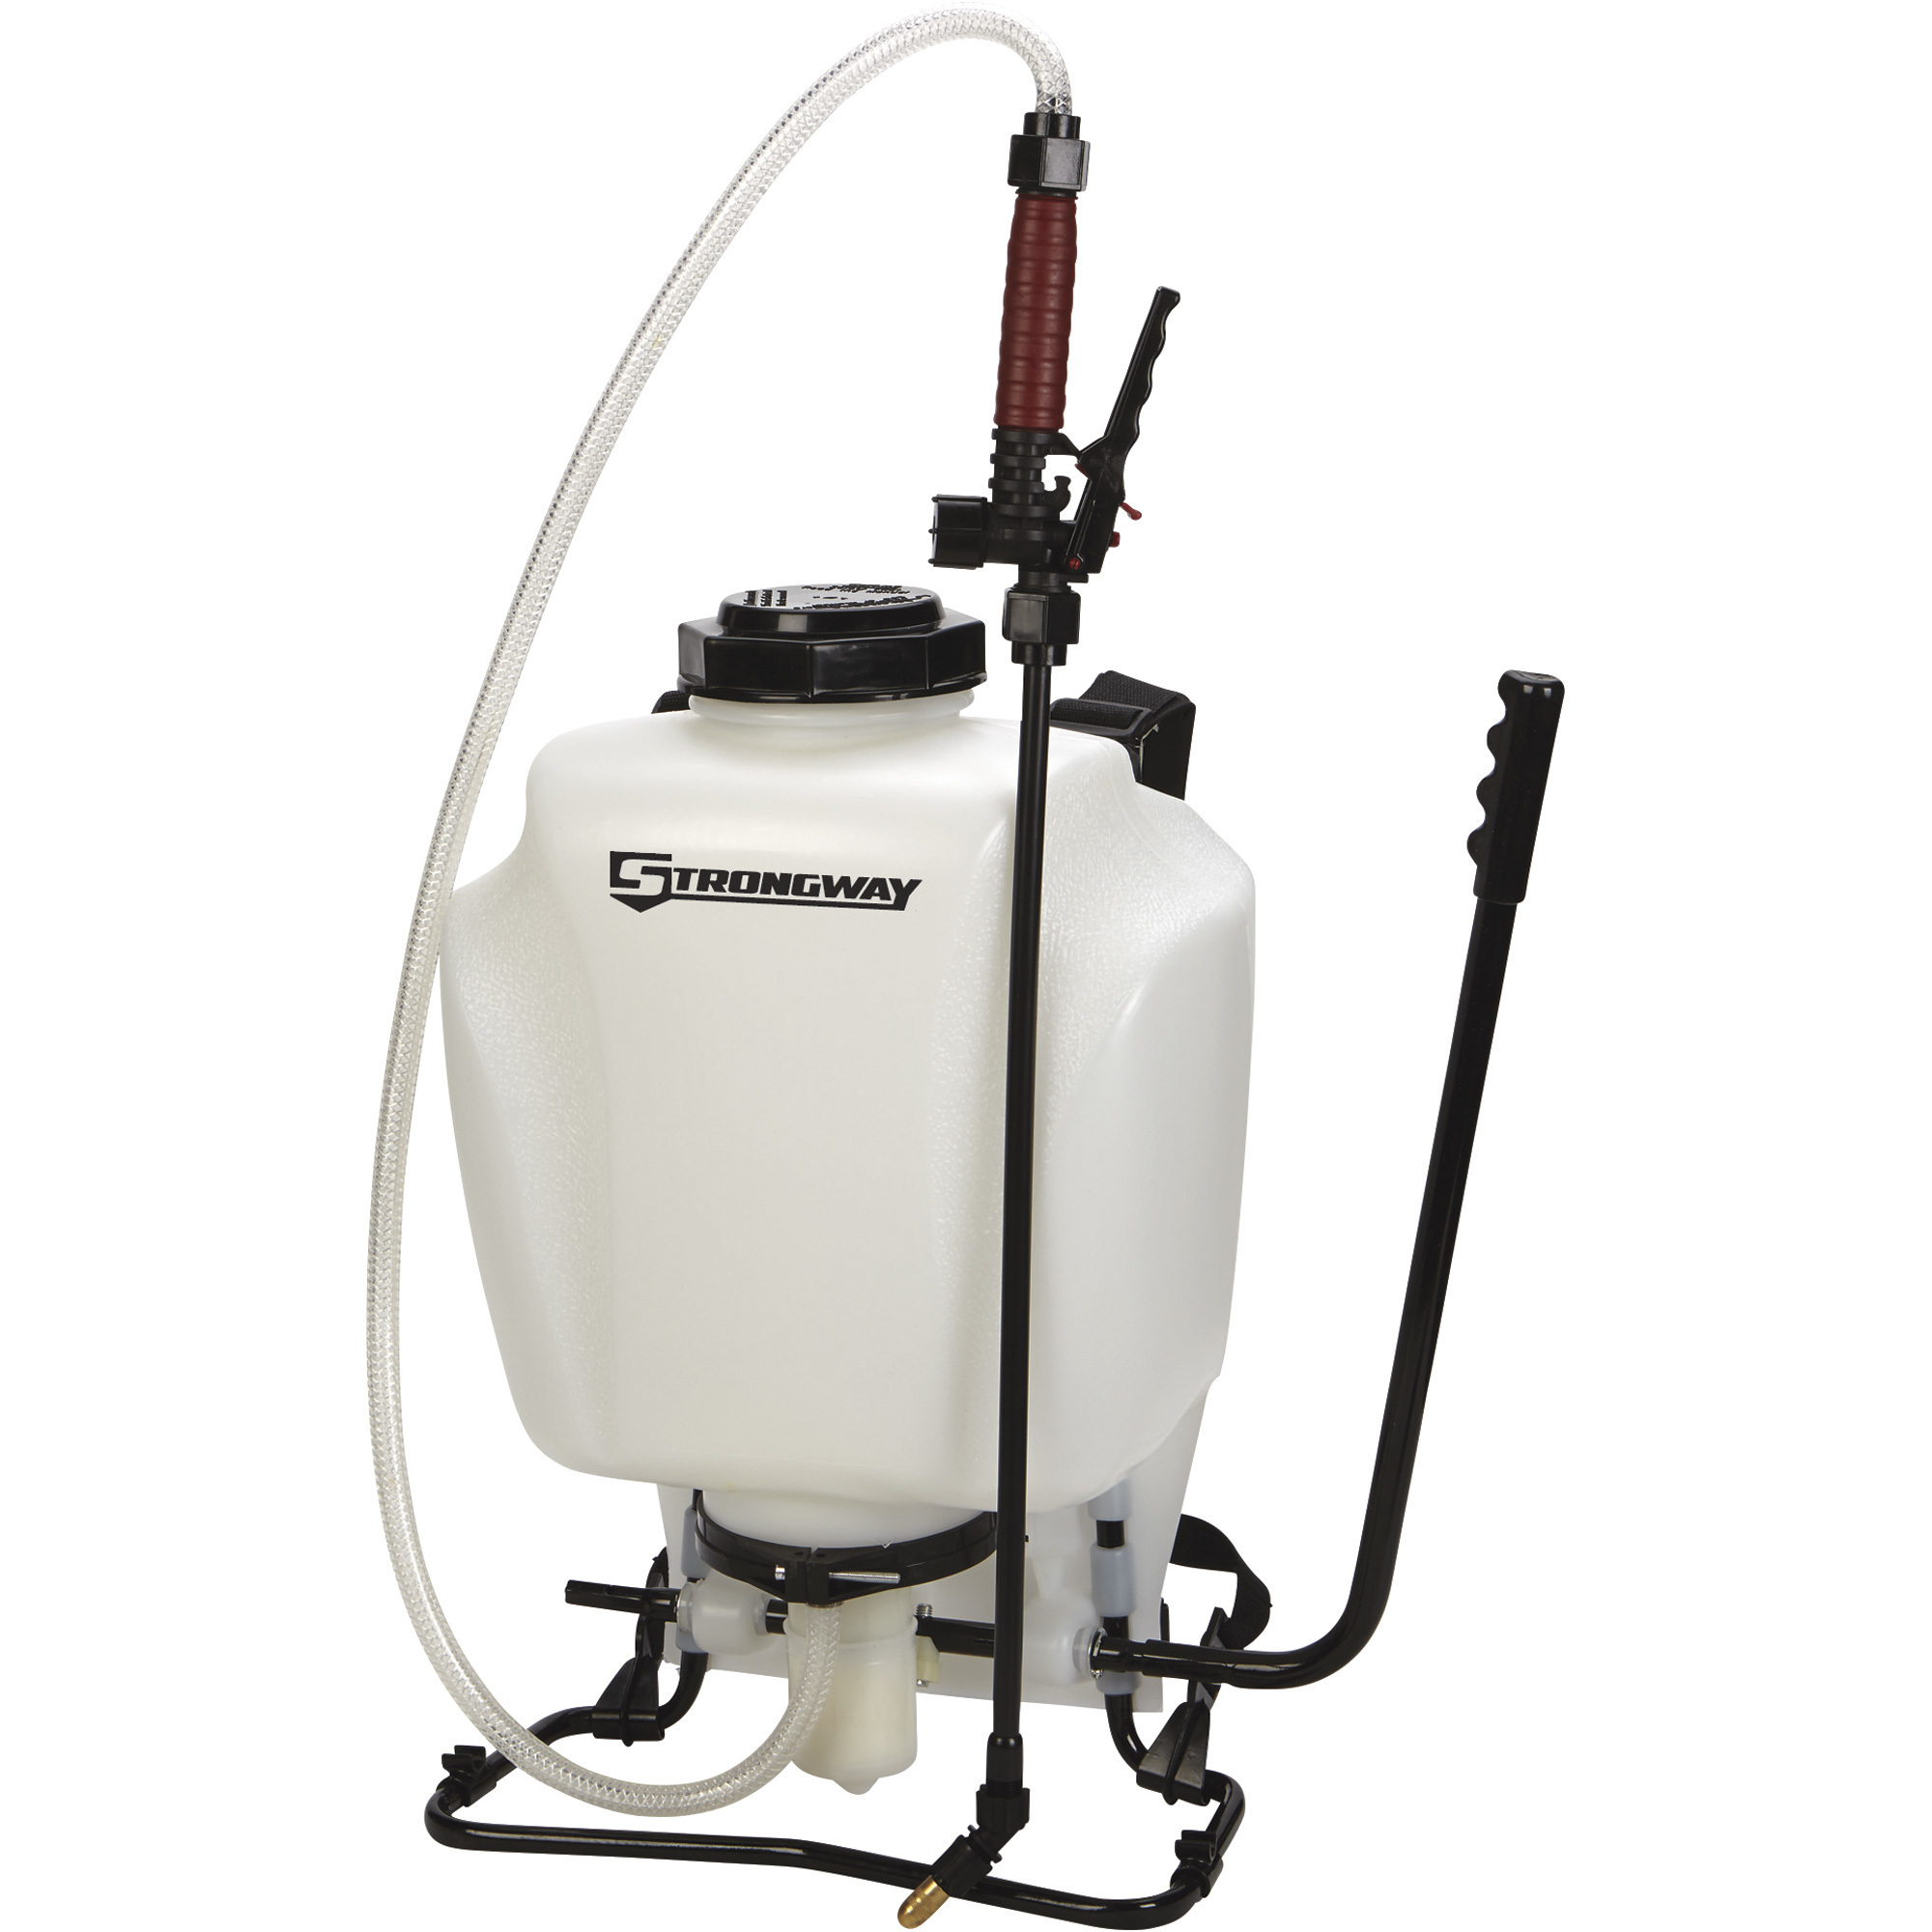 Strongway Backpack Sprayer Pro, 4-Gallon Capacity, 90 PSI, Model 61800